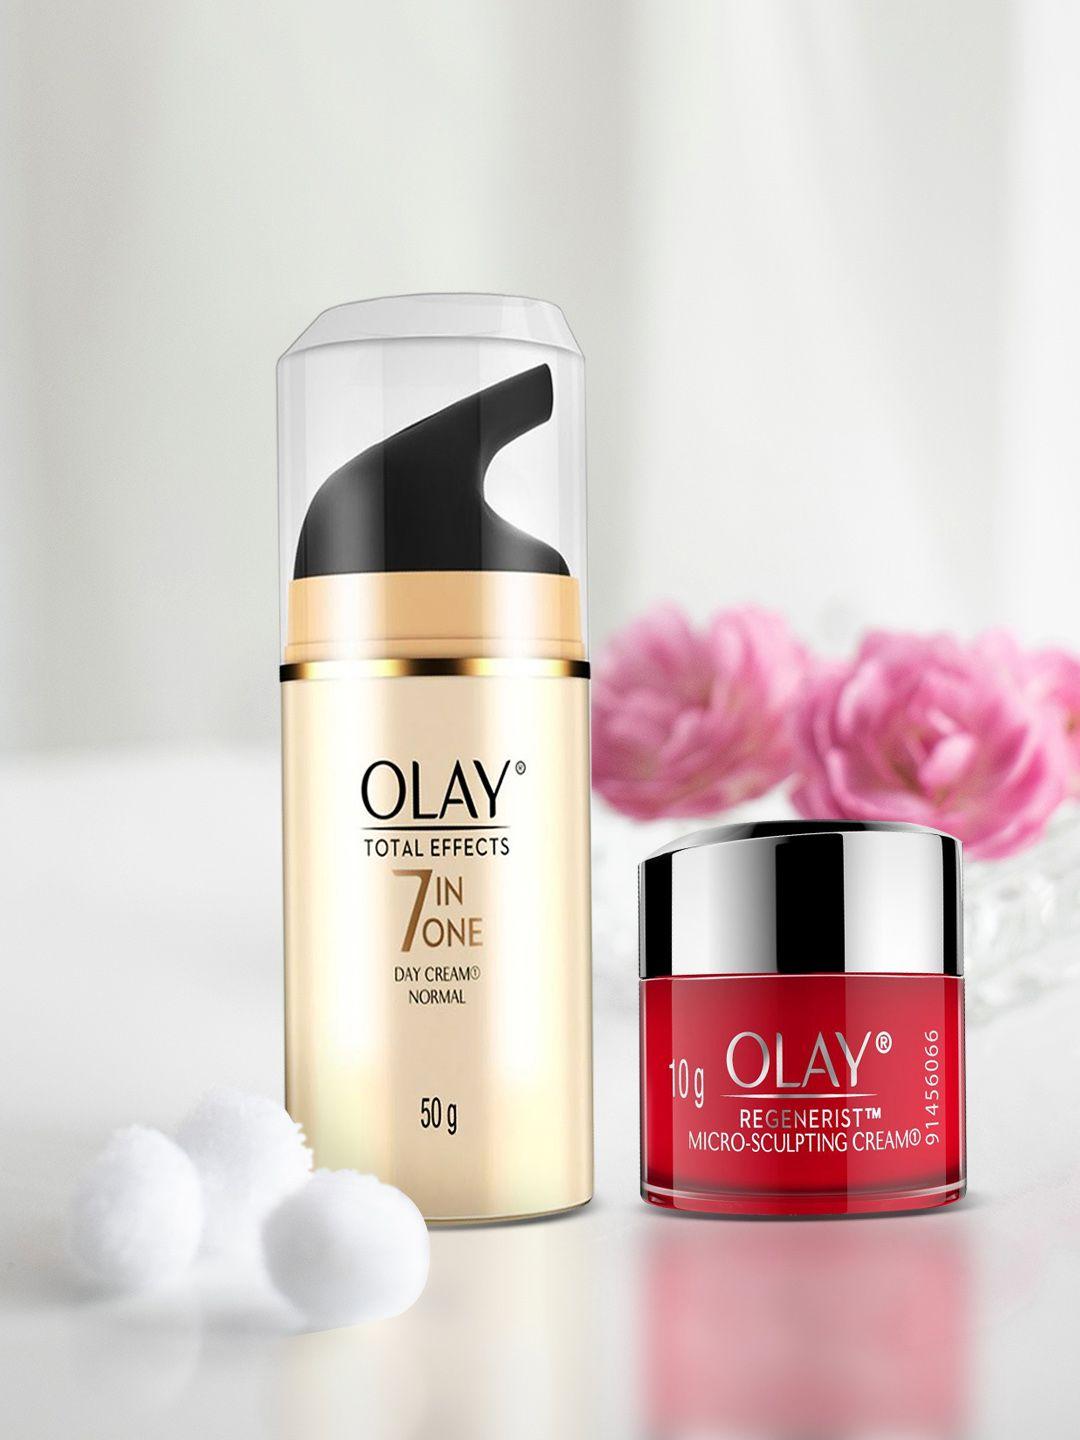 olay set of total effects anti-ageing & regenerist micro-sculpting cream 60 g